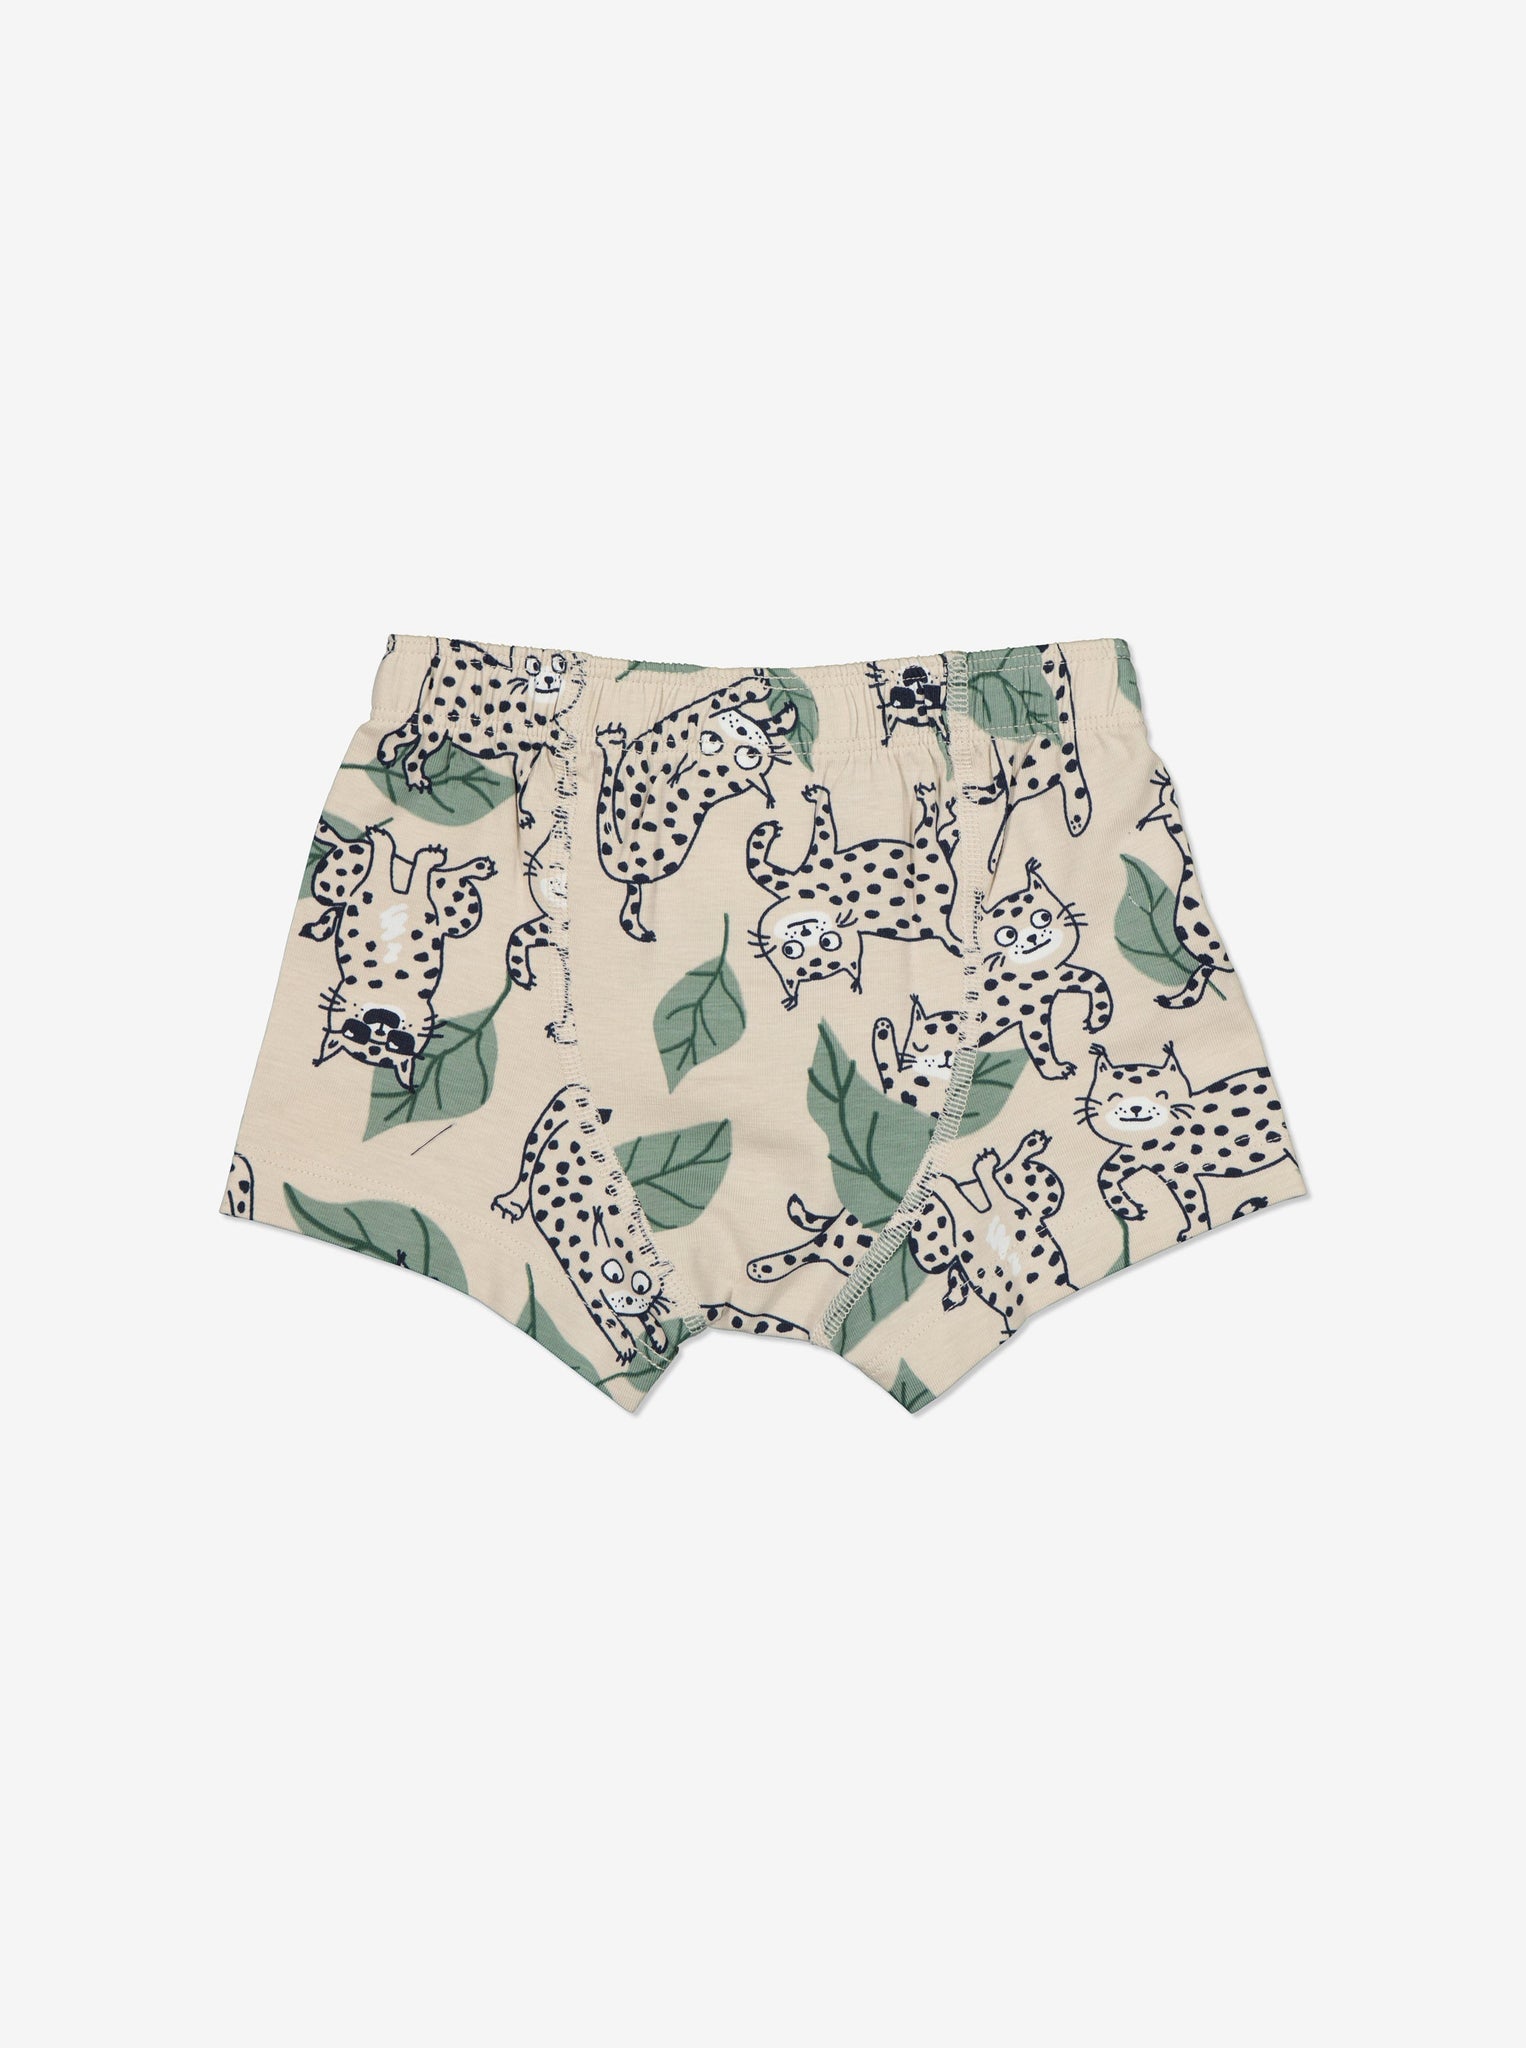 Organic Cotton Beige Boys Boxers from the Polarn O. Pyret Kidswear collection. Ethically produced kids clothing.